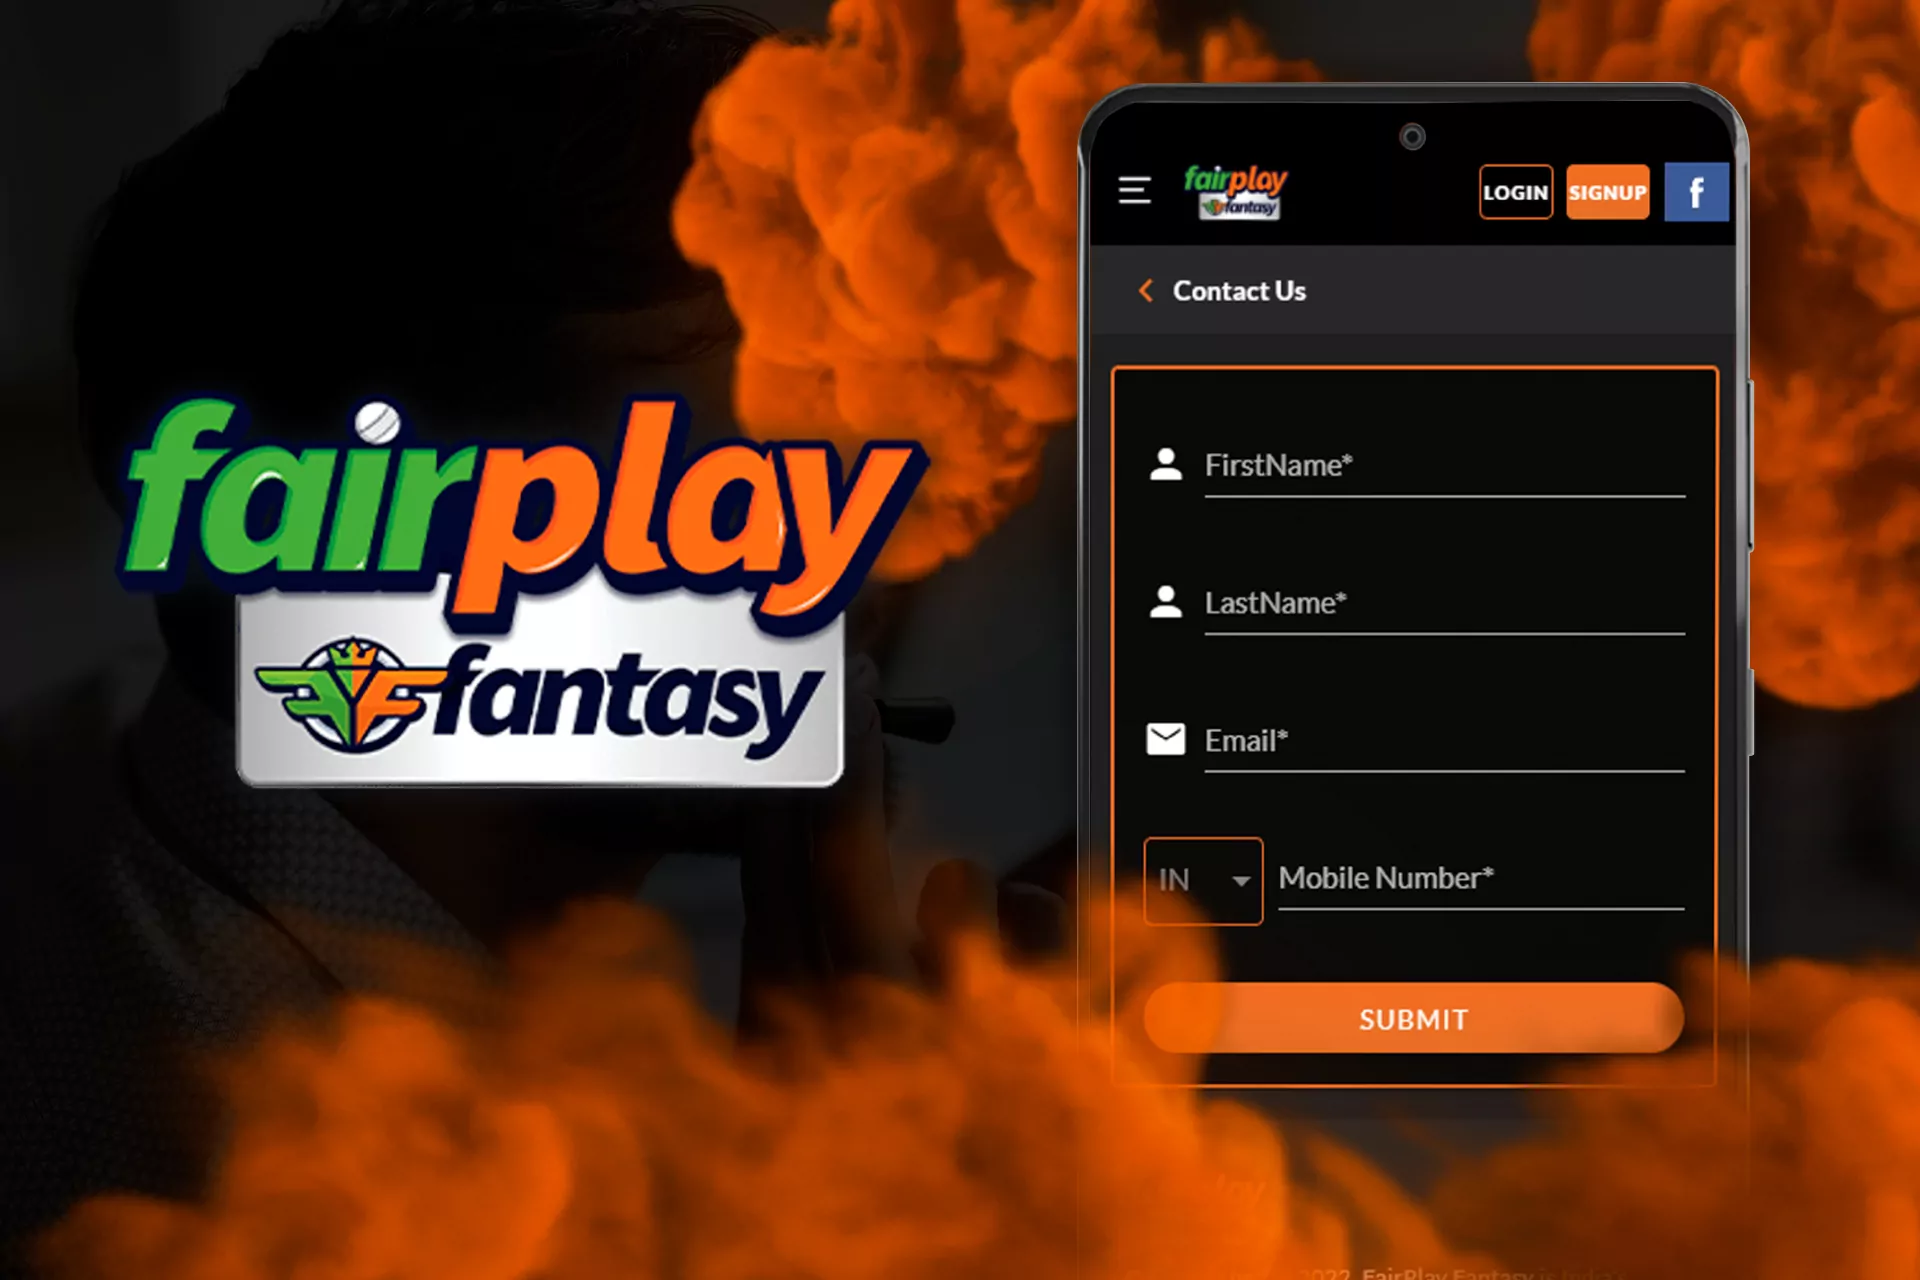 Ask the support if you have questions about betting on Fairplay Fantasy.